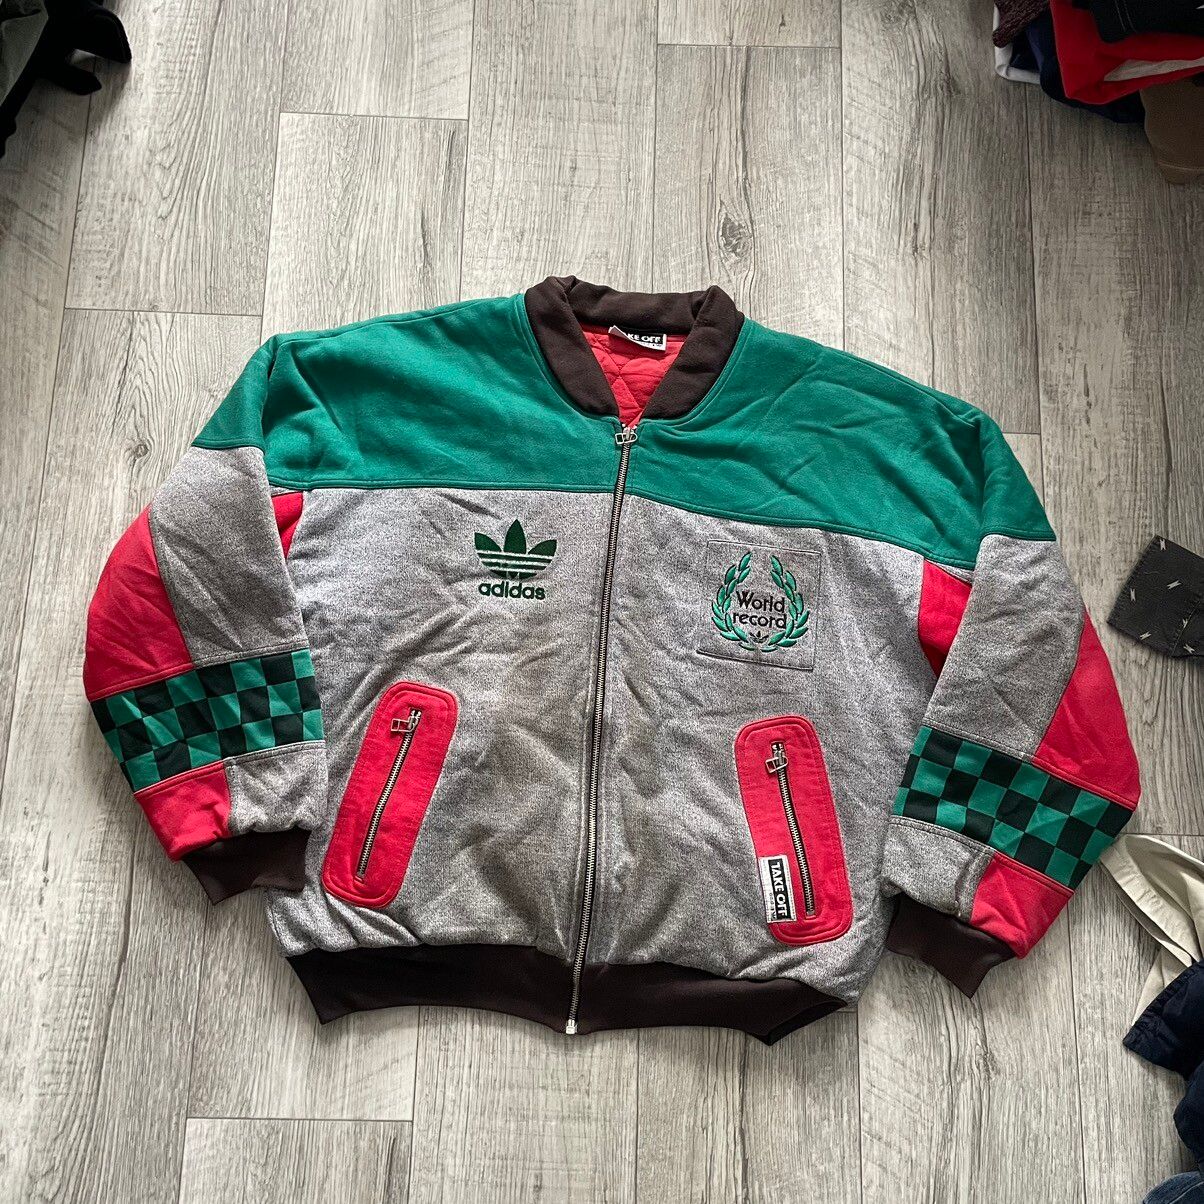 Adidas Adidas Bomber Jacket 90s 80s Olympic Games Vintage Y2K scott Size US XL / EU 56 / 4 - 1 Preview